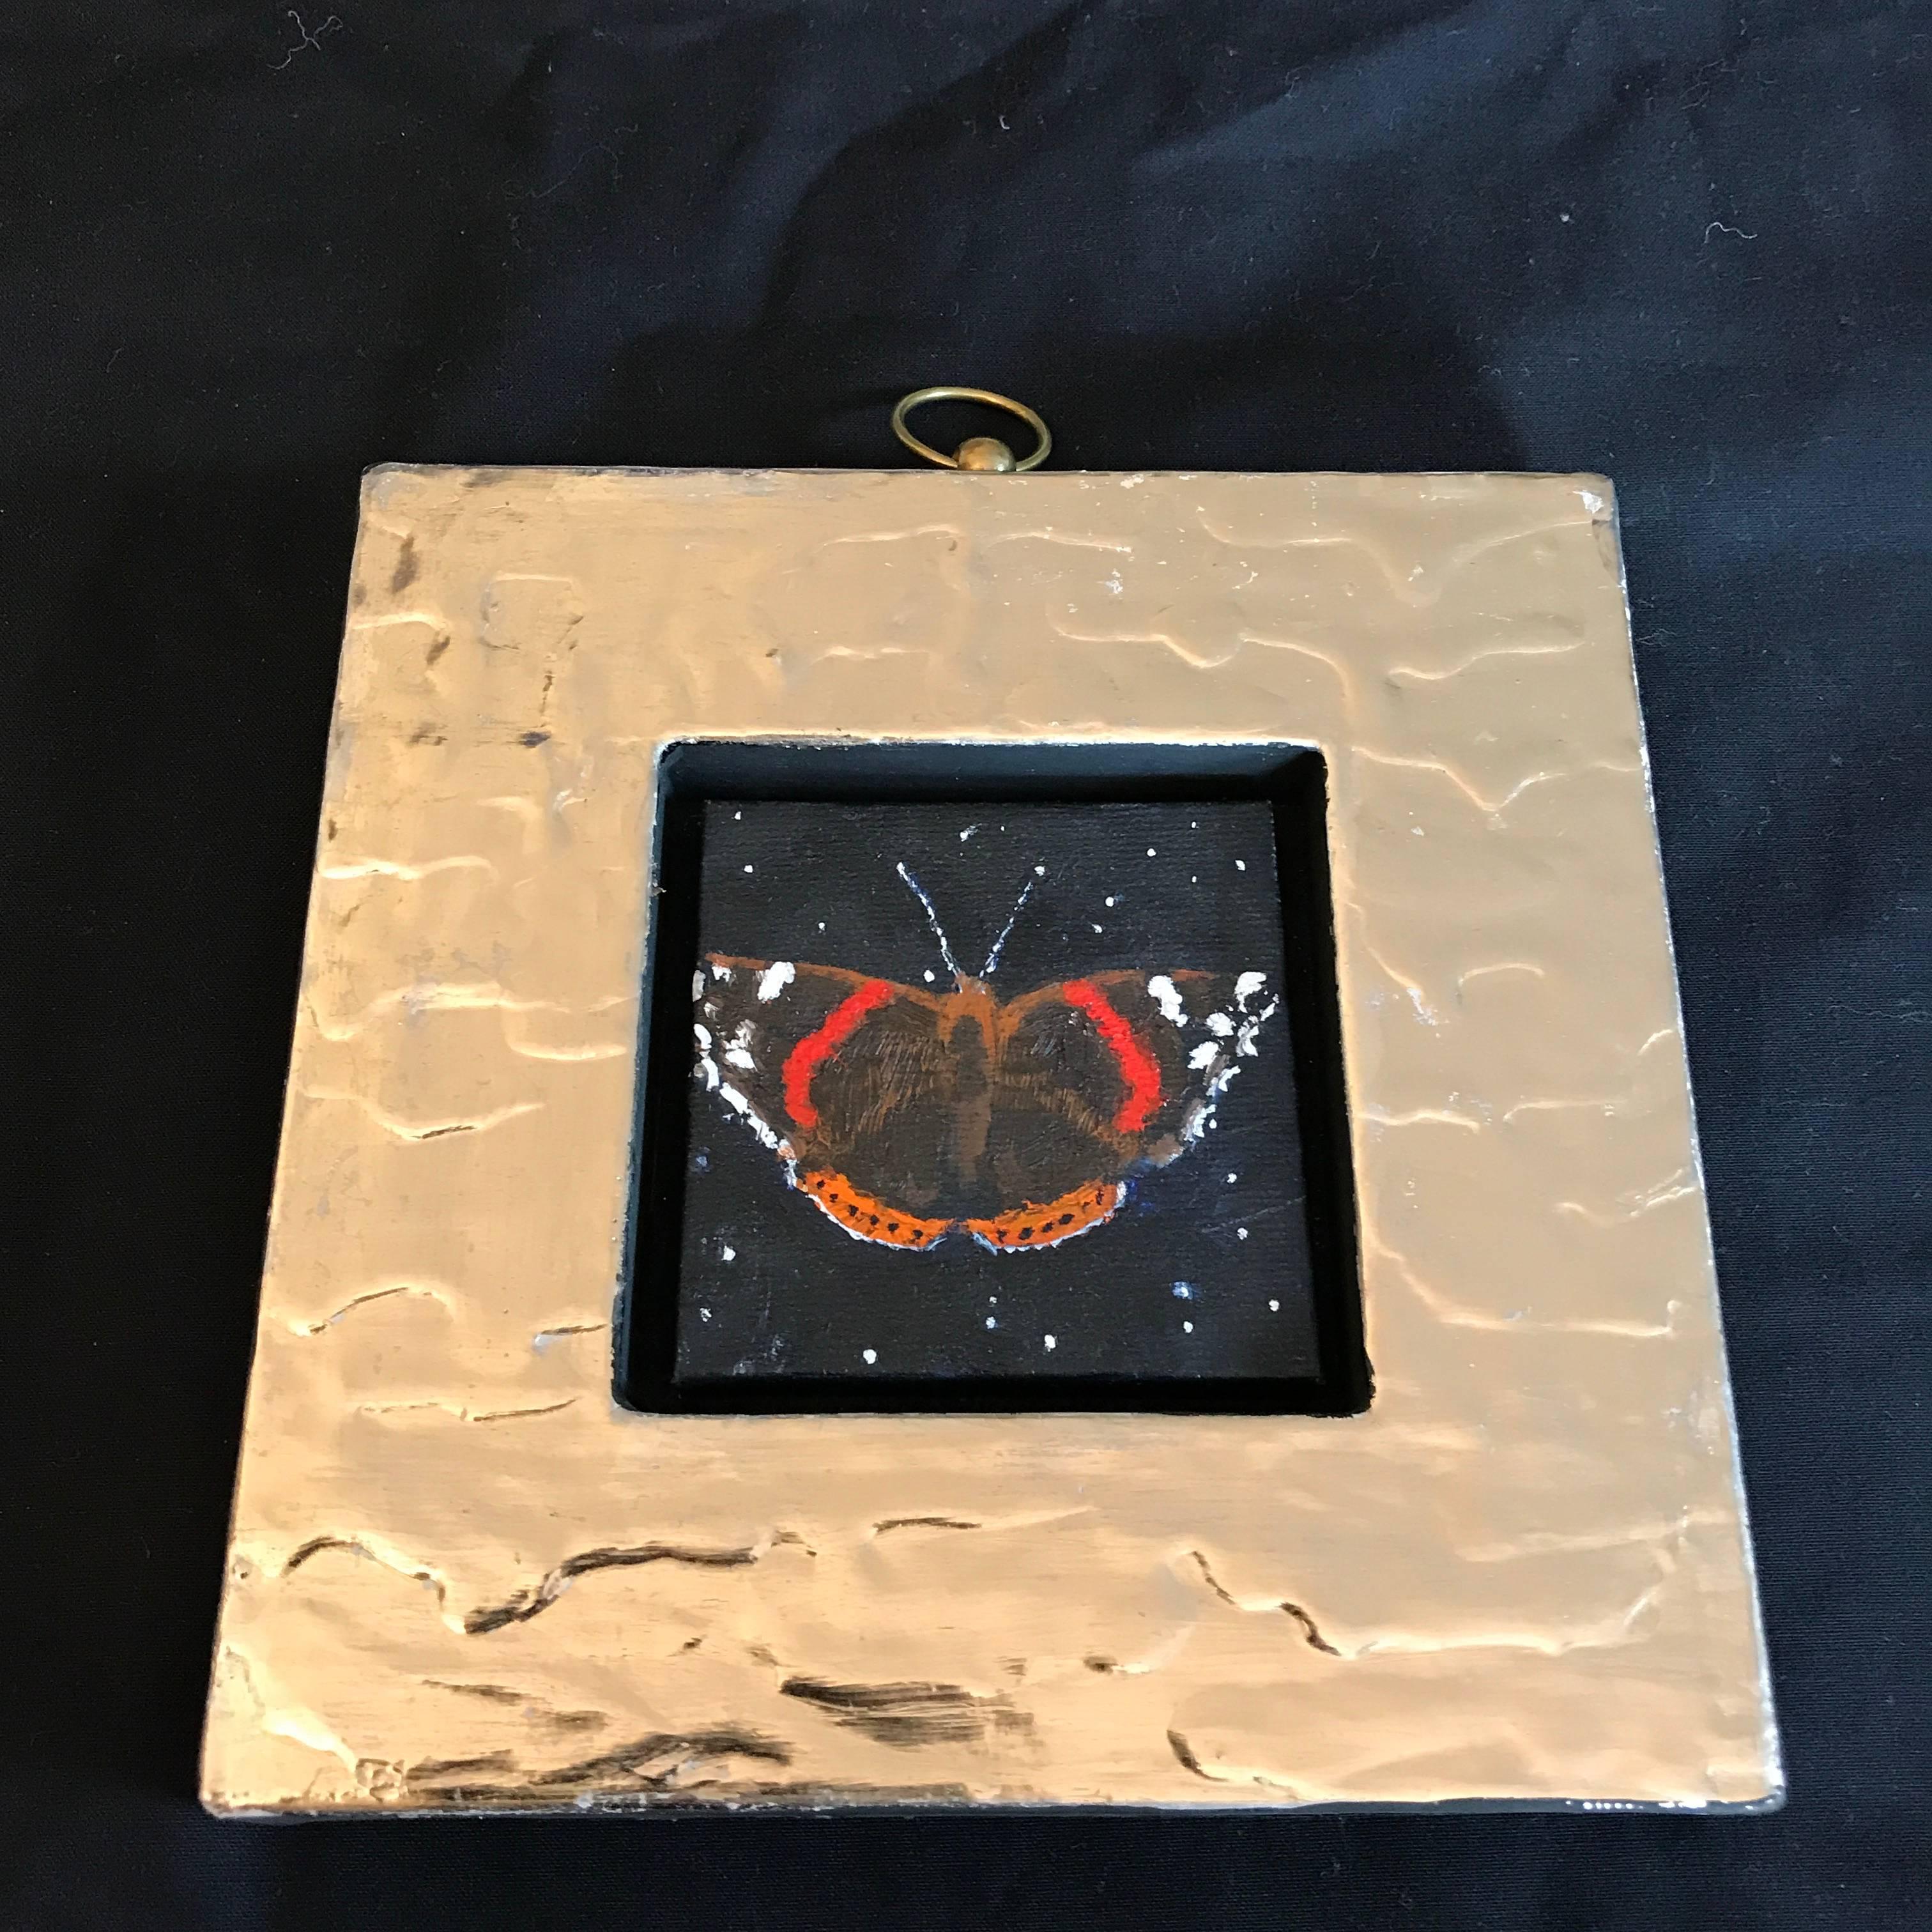 Red Admiral butterfly, starry night - Painting by Julie Fleming-Williams